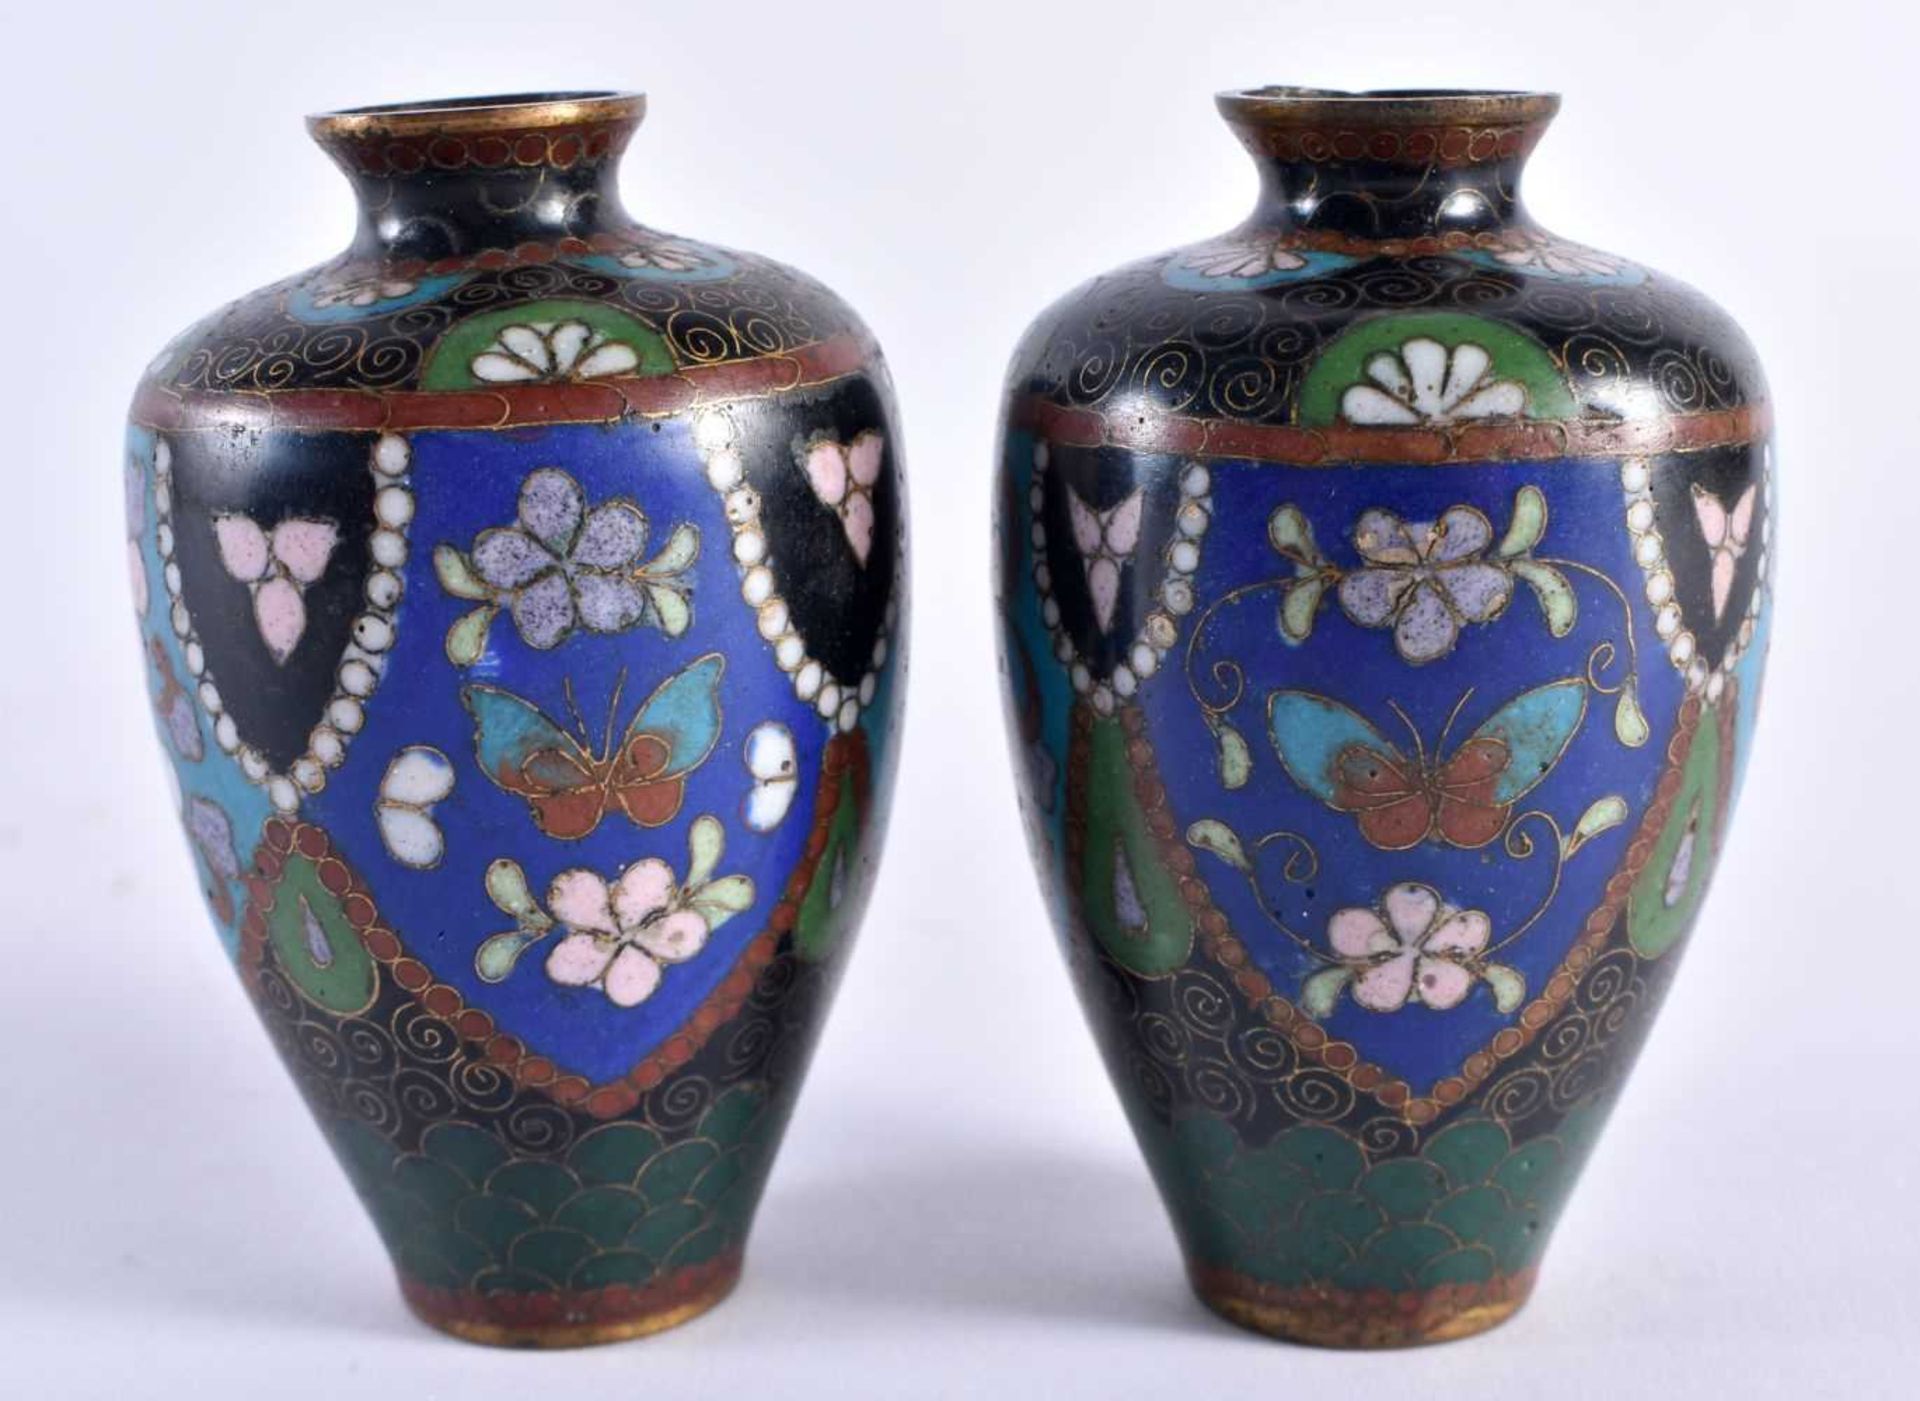 A MINIATURE PAIR OF LATE 19TH CENTURY JAPANESE MEIJI PERIOD CLOISONNE ENAMEL VASES decorated with - Image 3 of 5